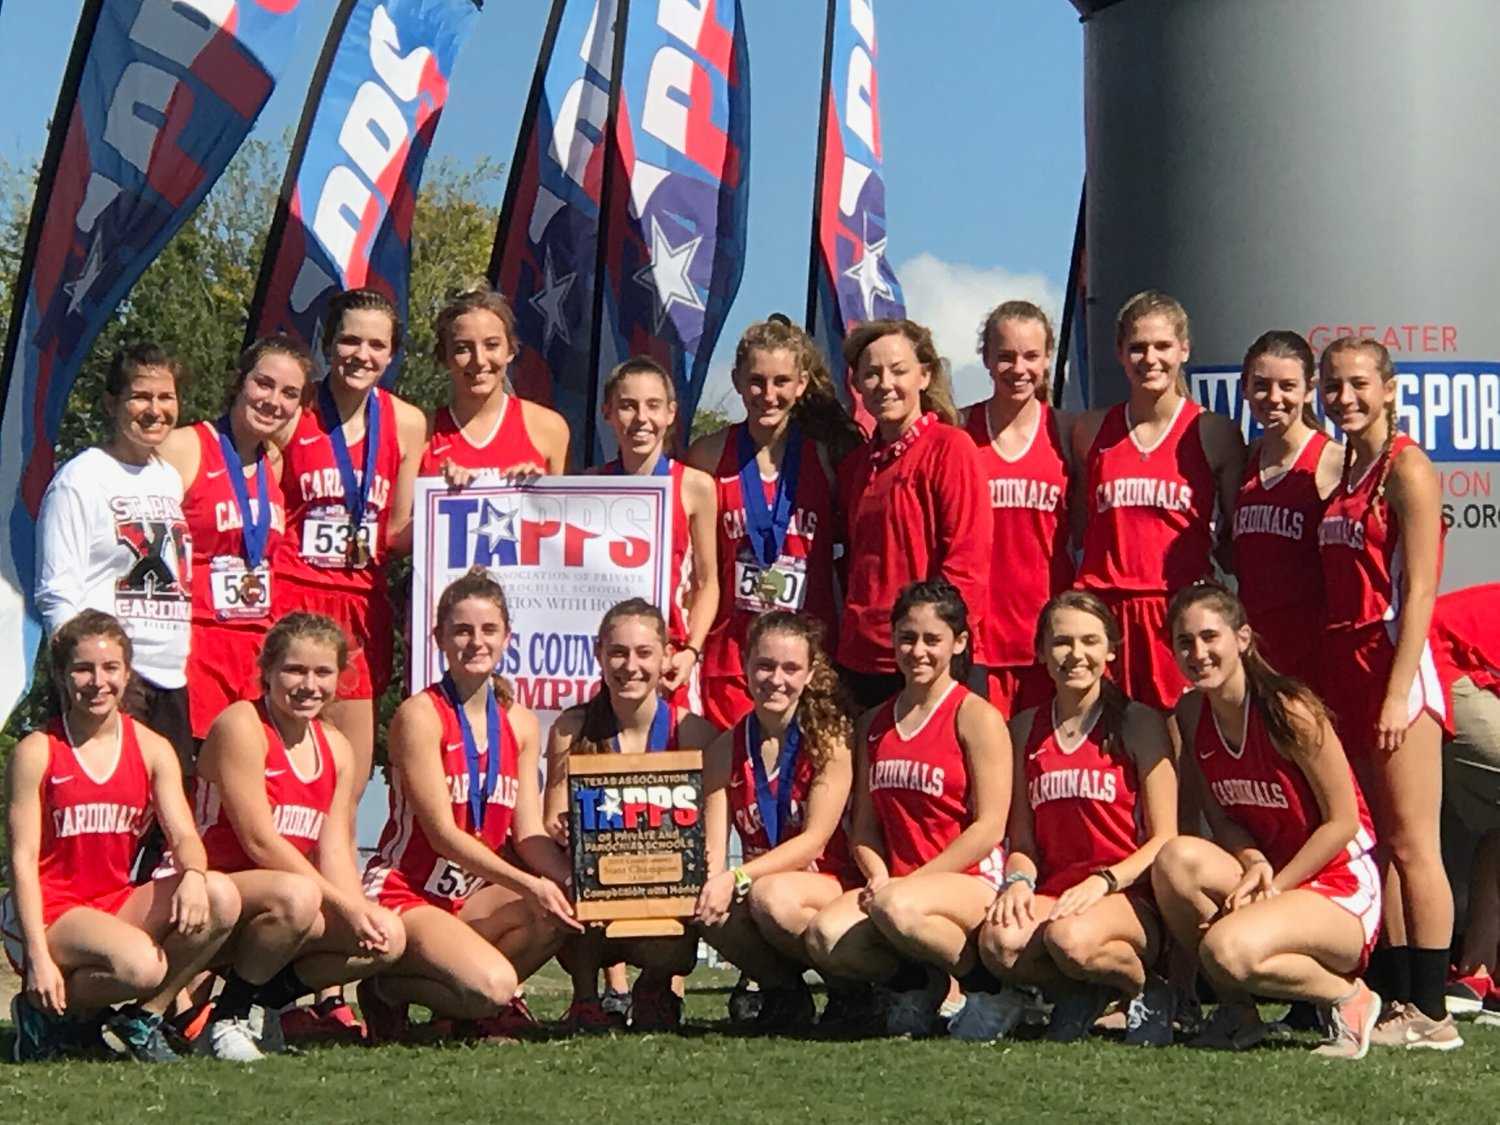 Pictured are the state champion Lady Cardinals. Kneeling down (from left) are Sarah Barecky, Taylor Wauson, Riley Johnson*, Hope Kapavik*, Bailey Blair*, Trinity Garza, Macy Grabarkievtz and Lauryn Kubenka. Top row (from left) are assistant Nicco Brown, Paige Brown*, Cameron Pesek*, Delynn Pesek, Juliana Davis*, Rebecca Wagner*, Head Coach Dana Beal, 
Grace Pilat, Holly Hull, Tristin Davis, Brooke Pesek. Names with an asterisk* are the race runners.